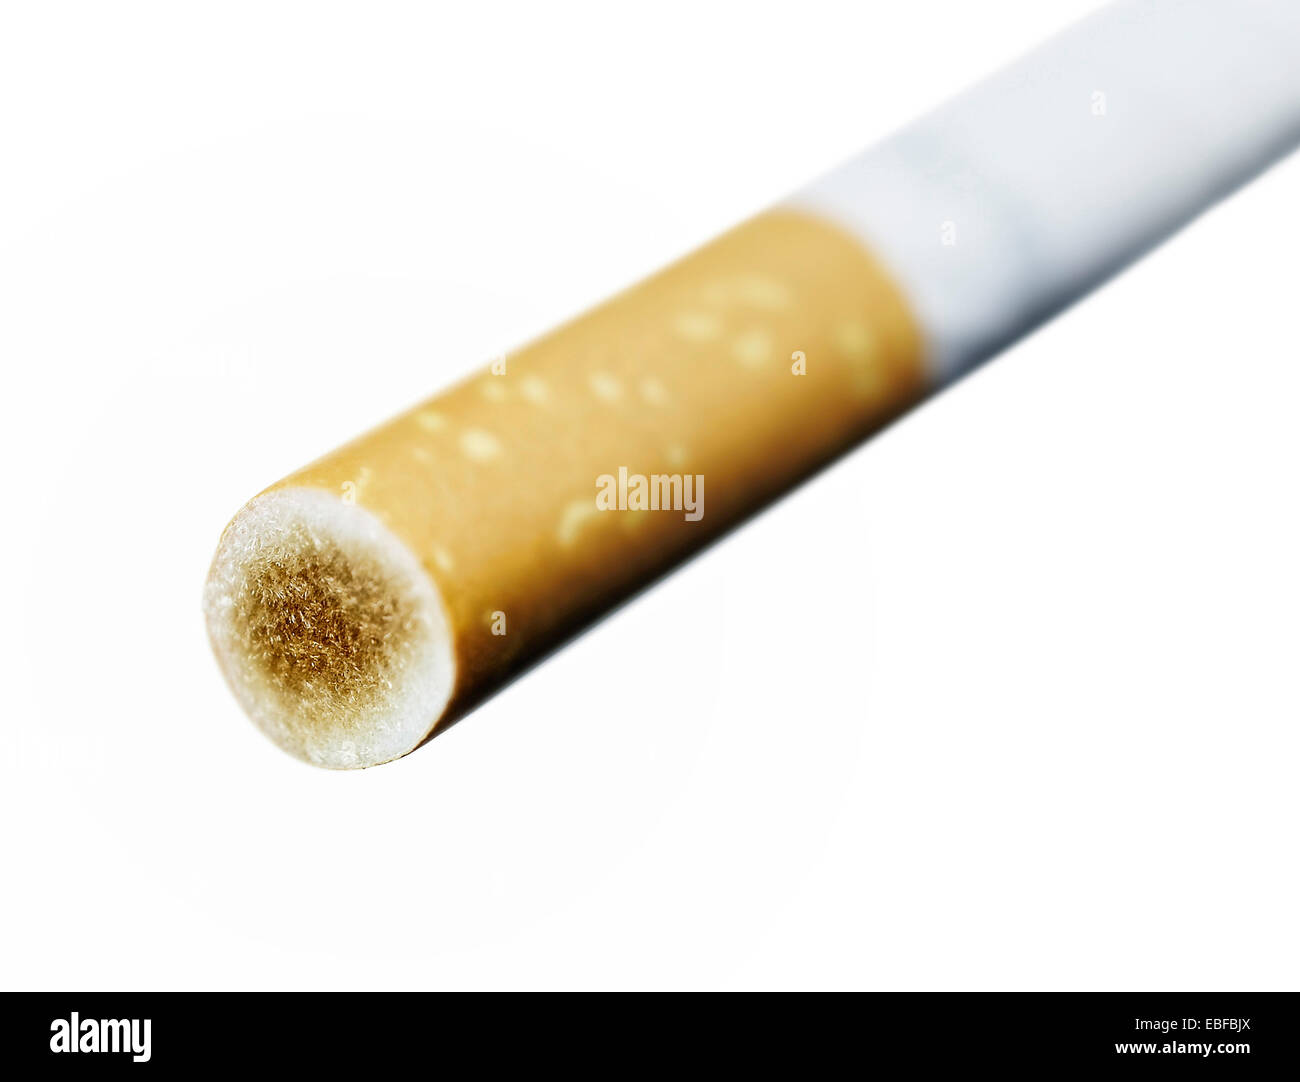 Nicotine on a cigarette filter Stock Photo